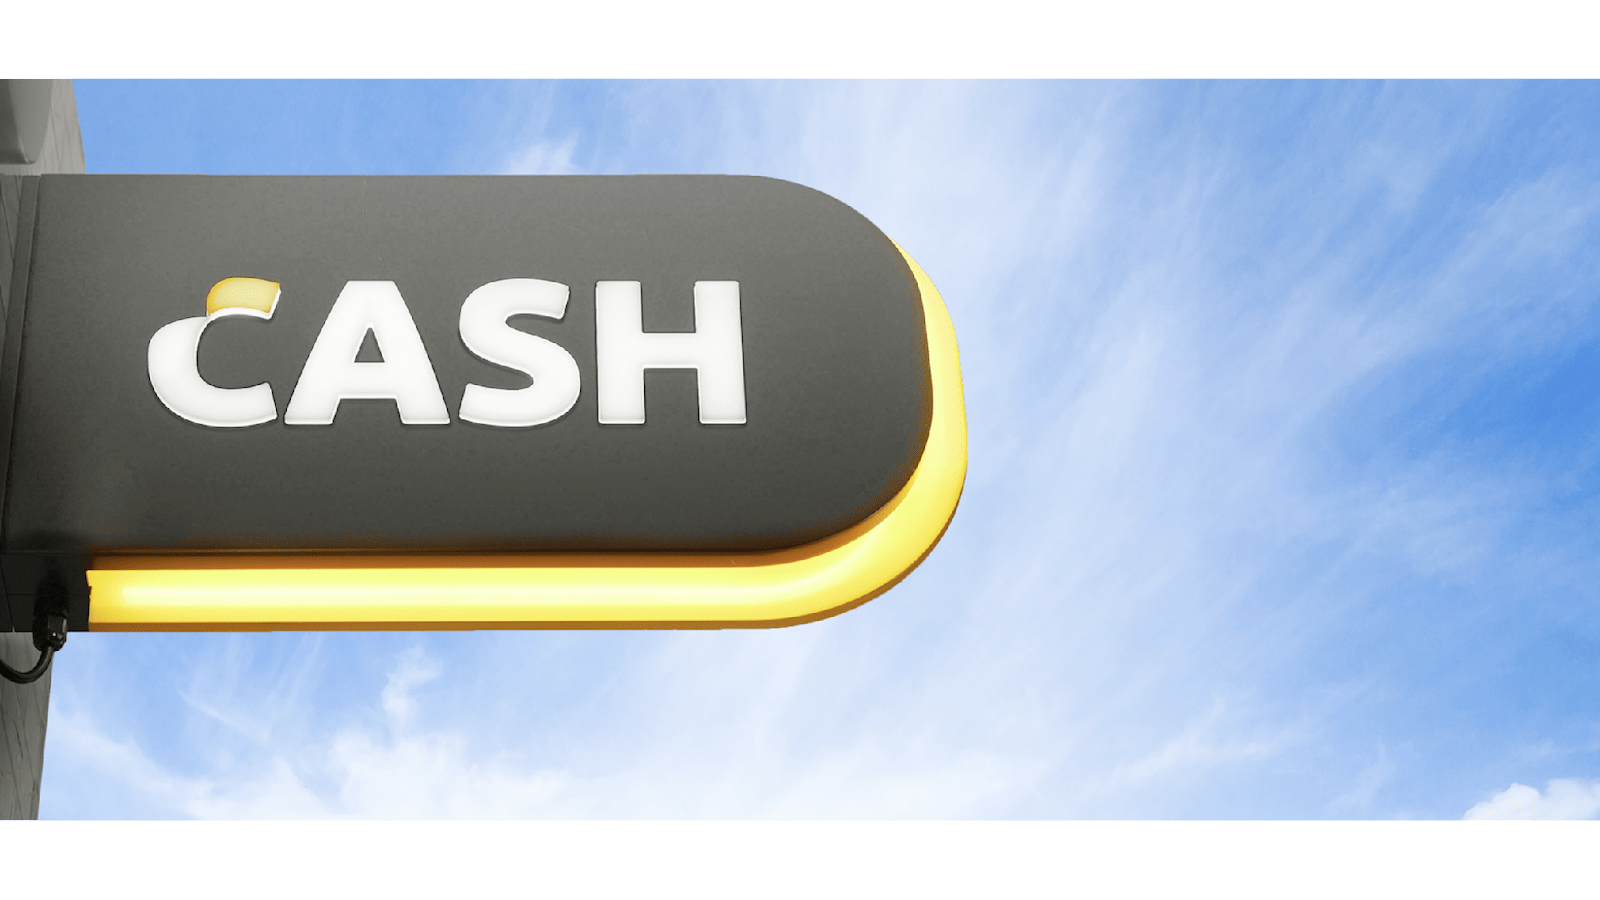 Points-CASH Brussels South Charleroi Airport Gosselies